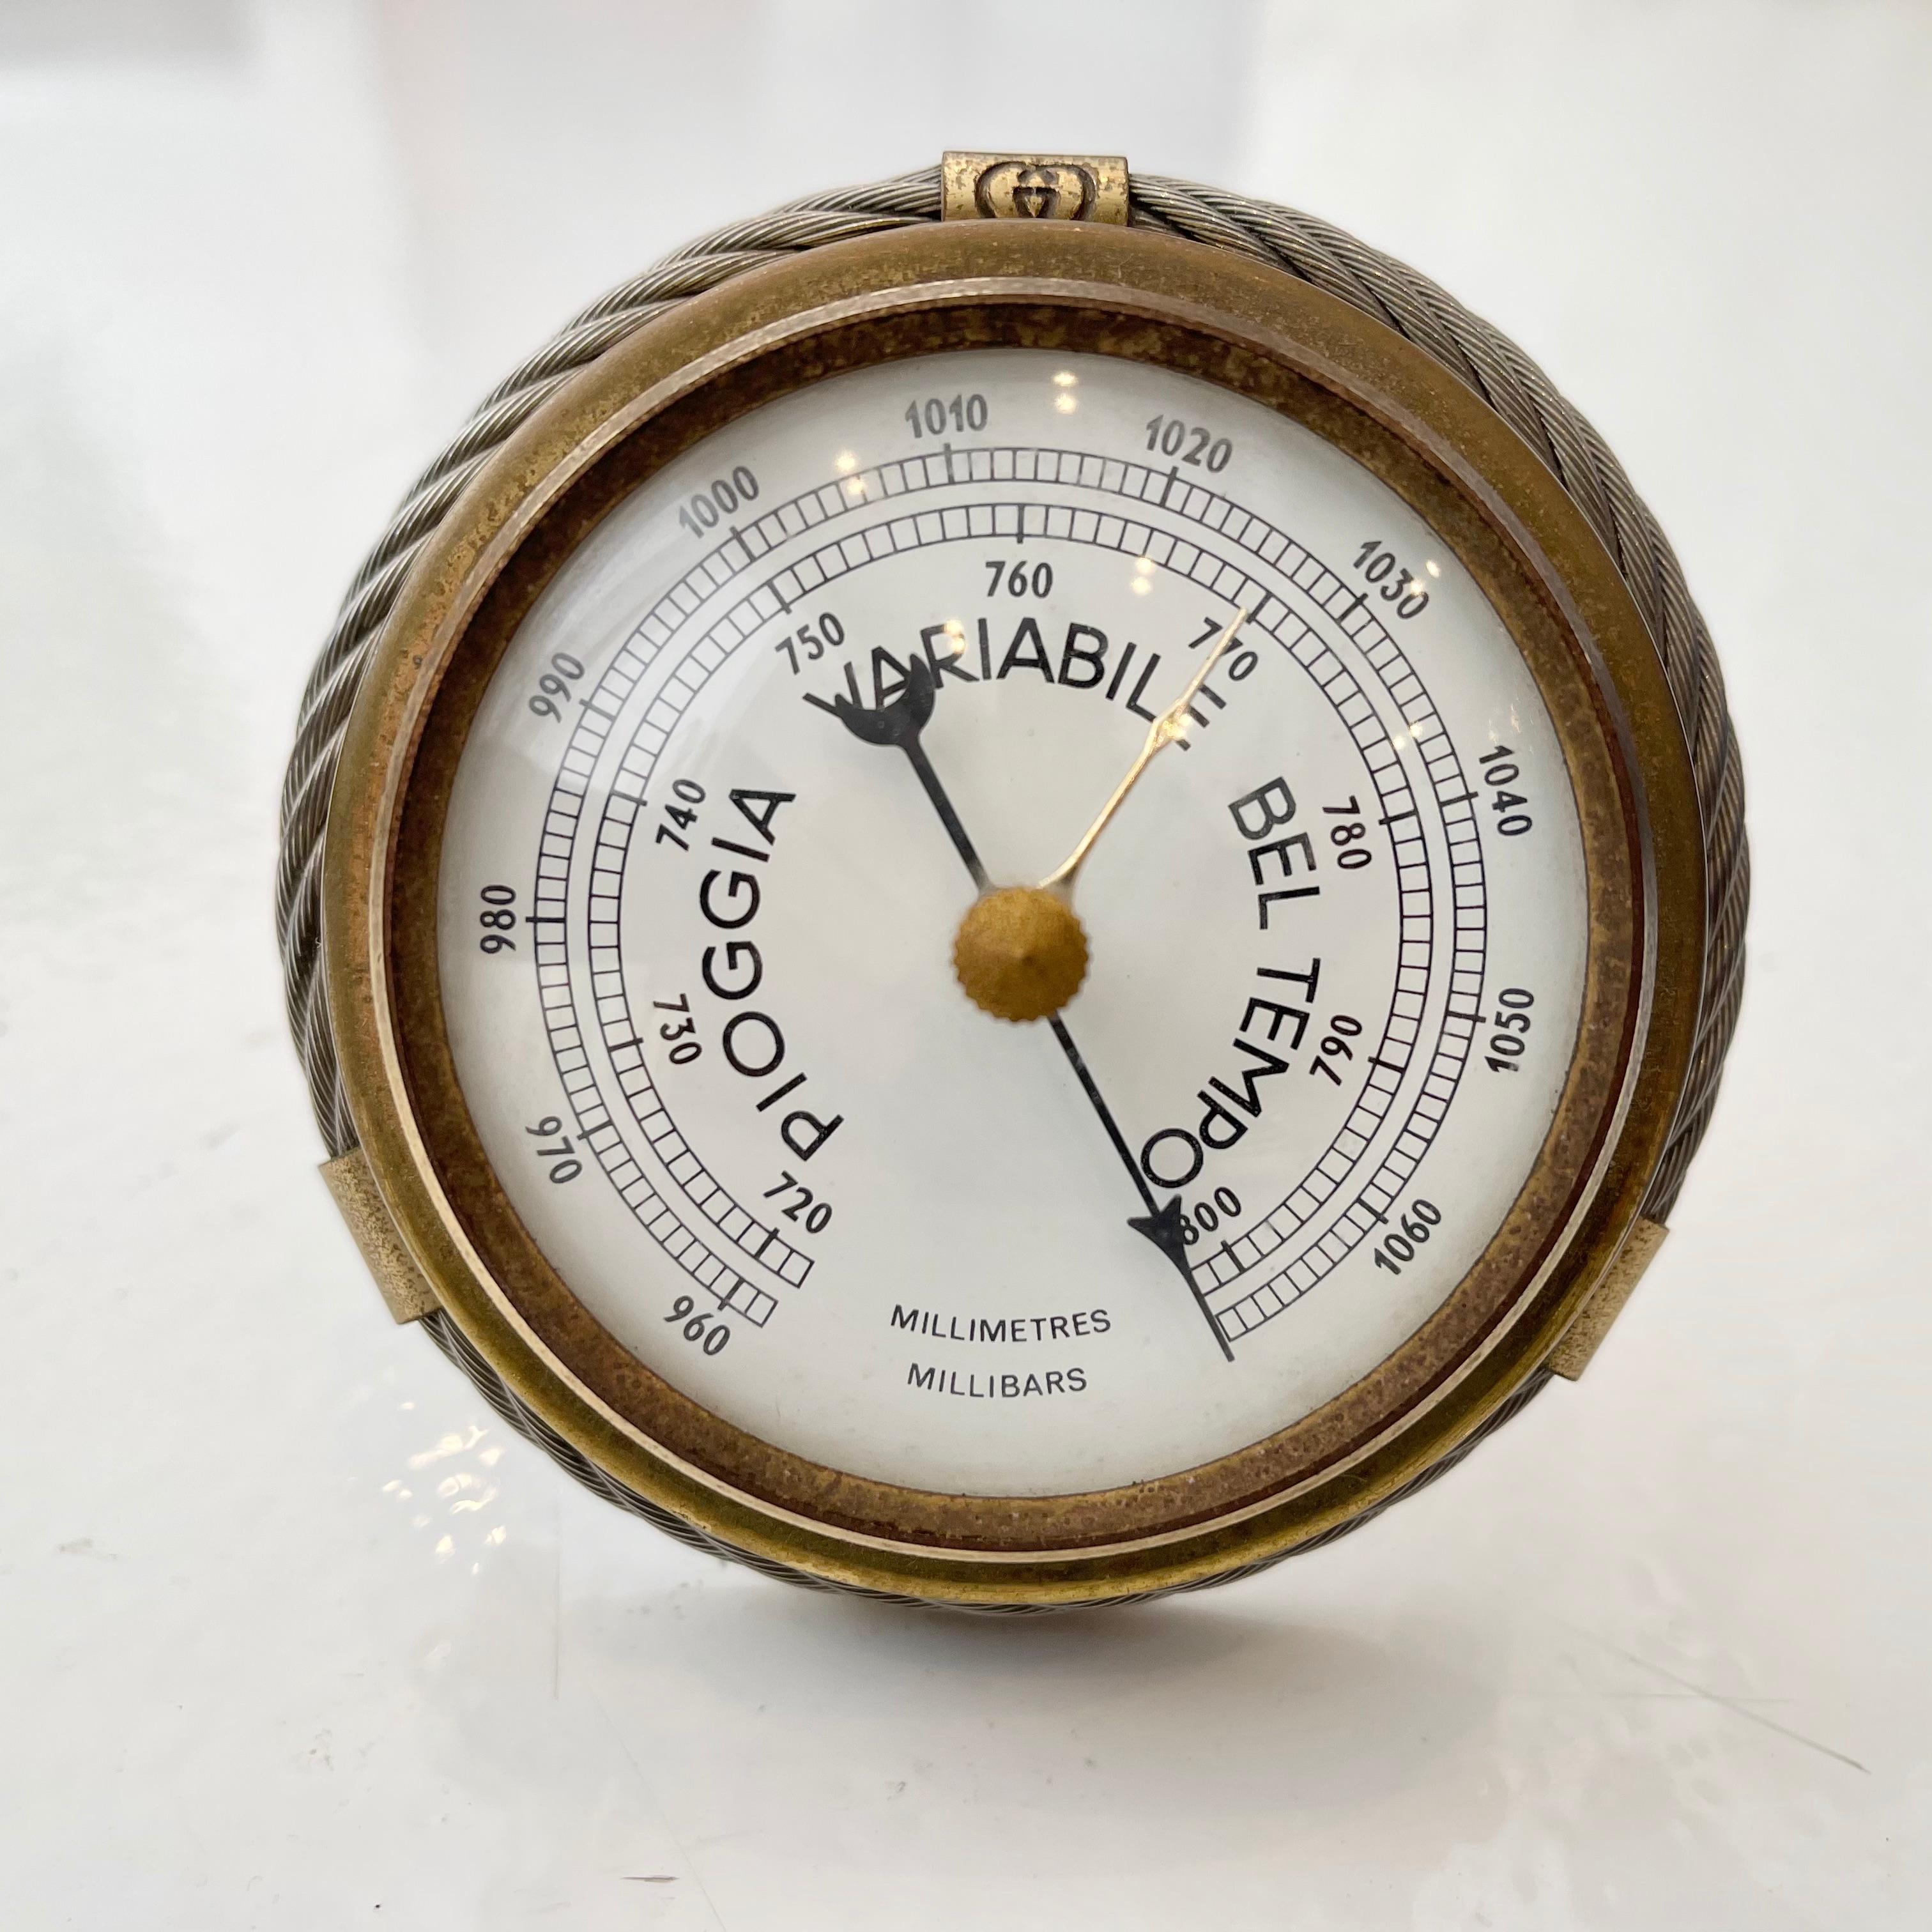 Vintage barometer by Gucci with beautiful nautical design details. Metal wire woven like a rope with brass accents, bearing the classic double linking Gucci G's at top center, wraps around the object.. The barometer is finished off with a bubble